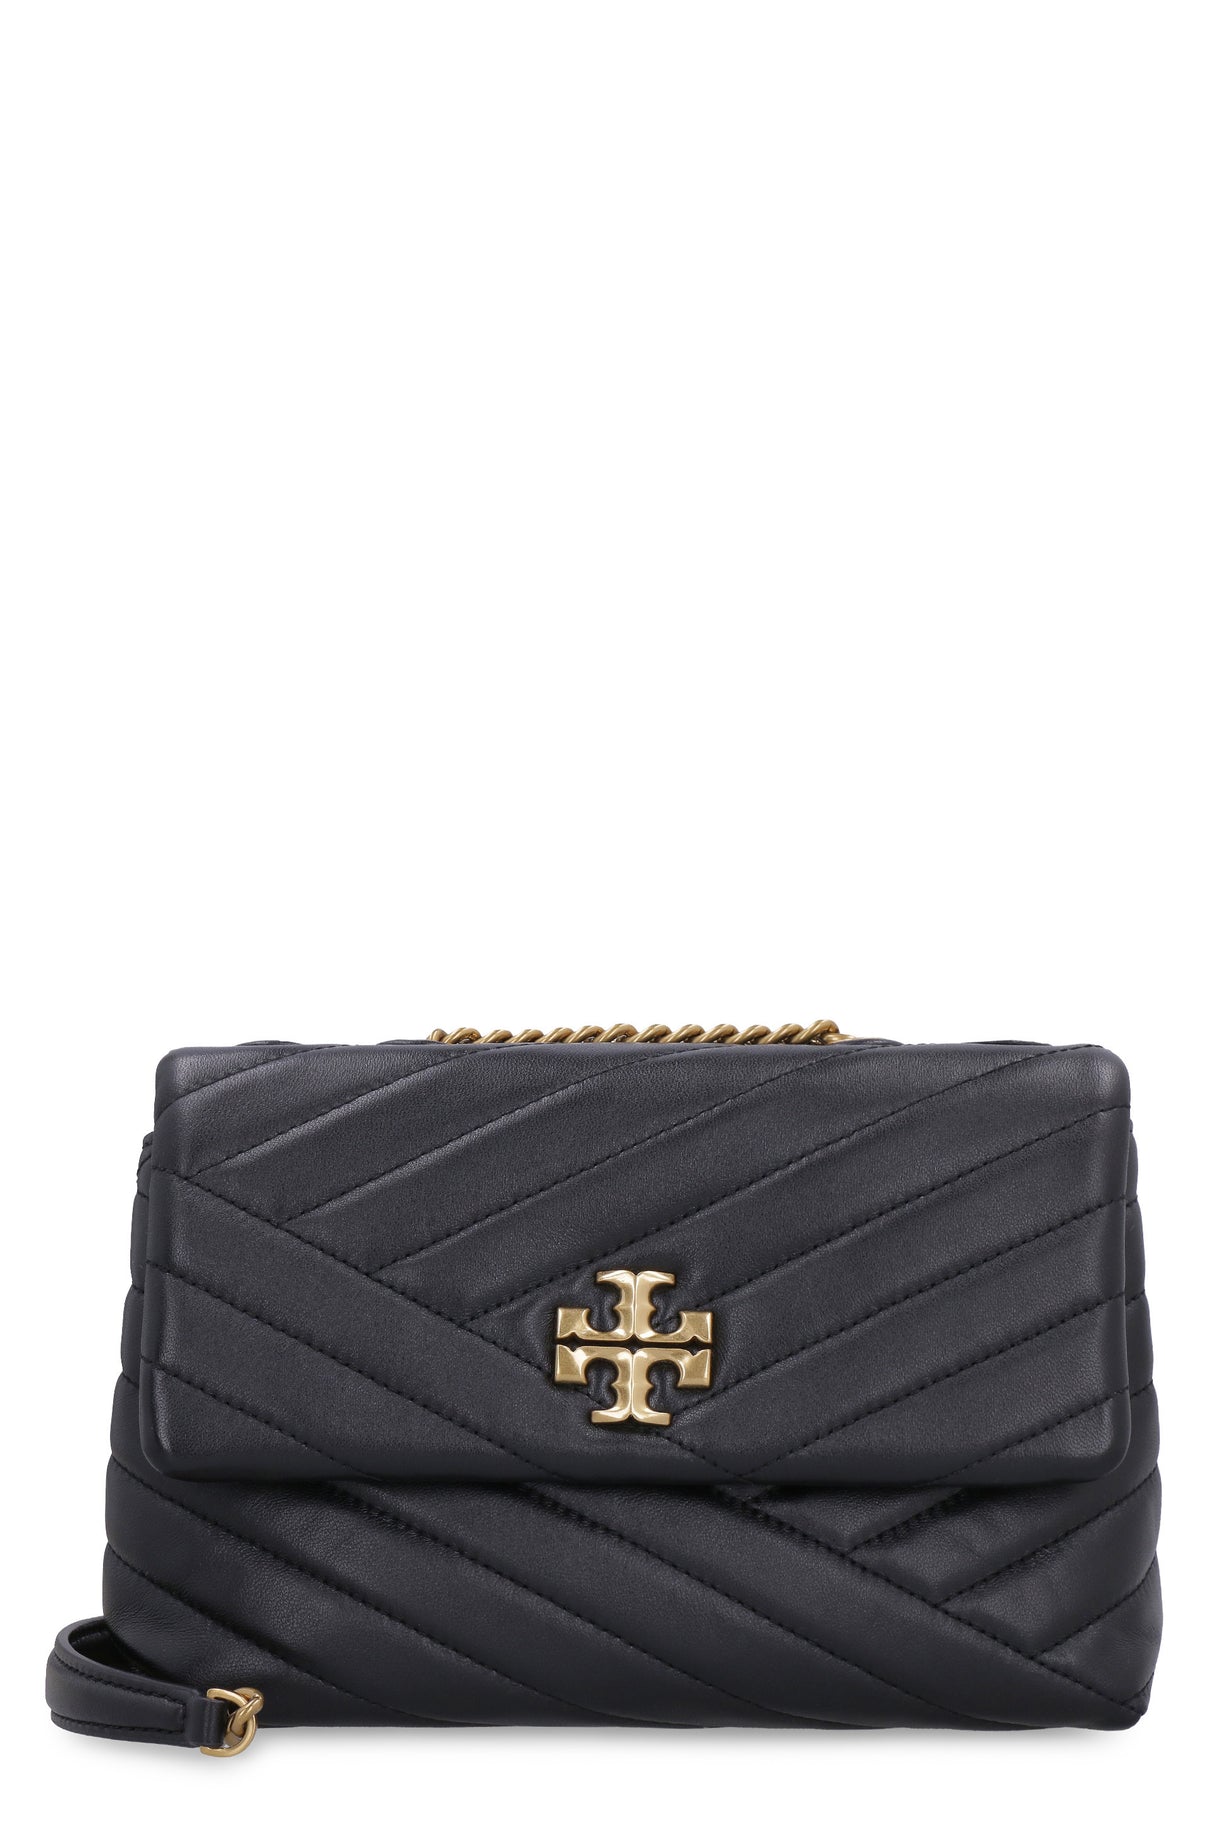 TORY BURCH Kira Chevron Quilted Lamb Leather Small Shoulder Bag in Black - 22.5x15x8 cm